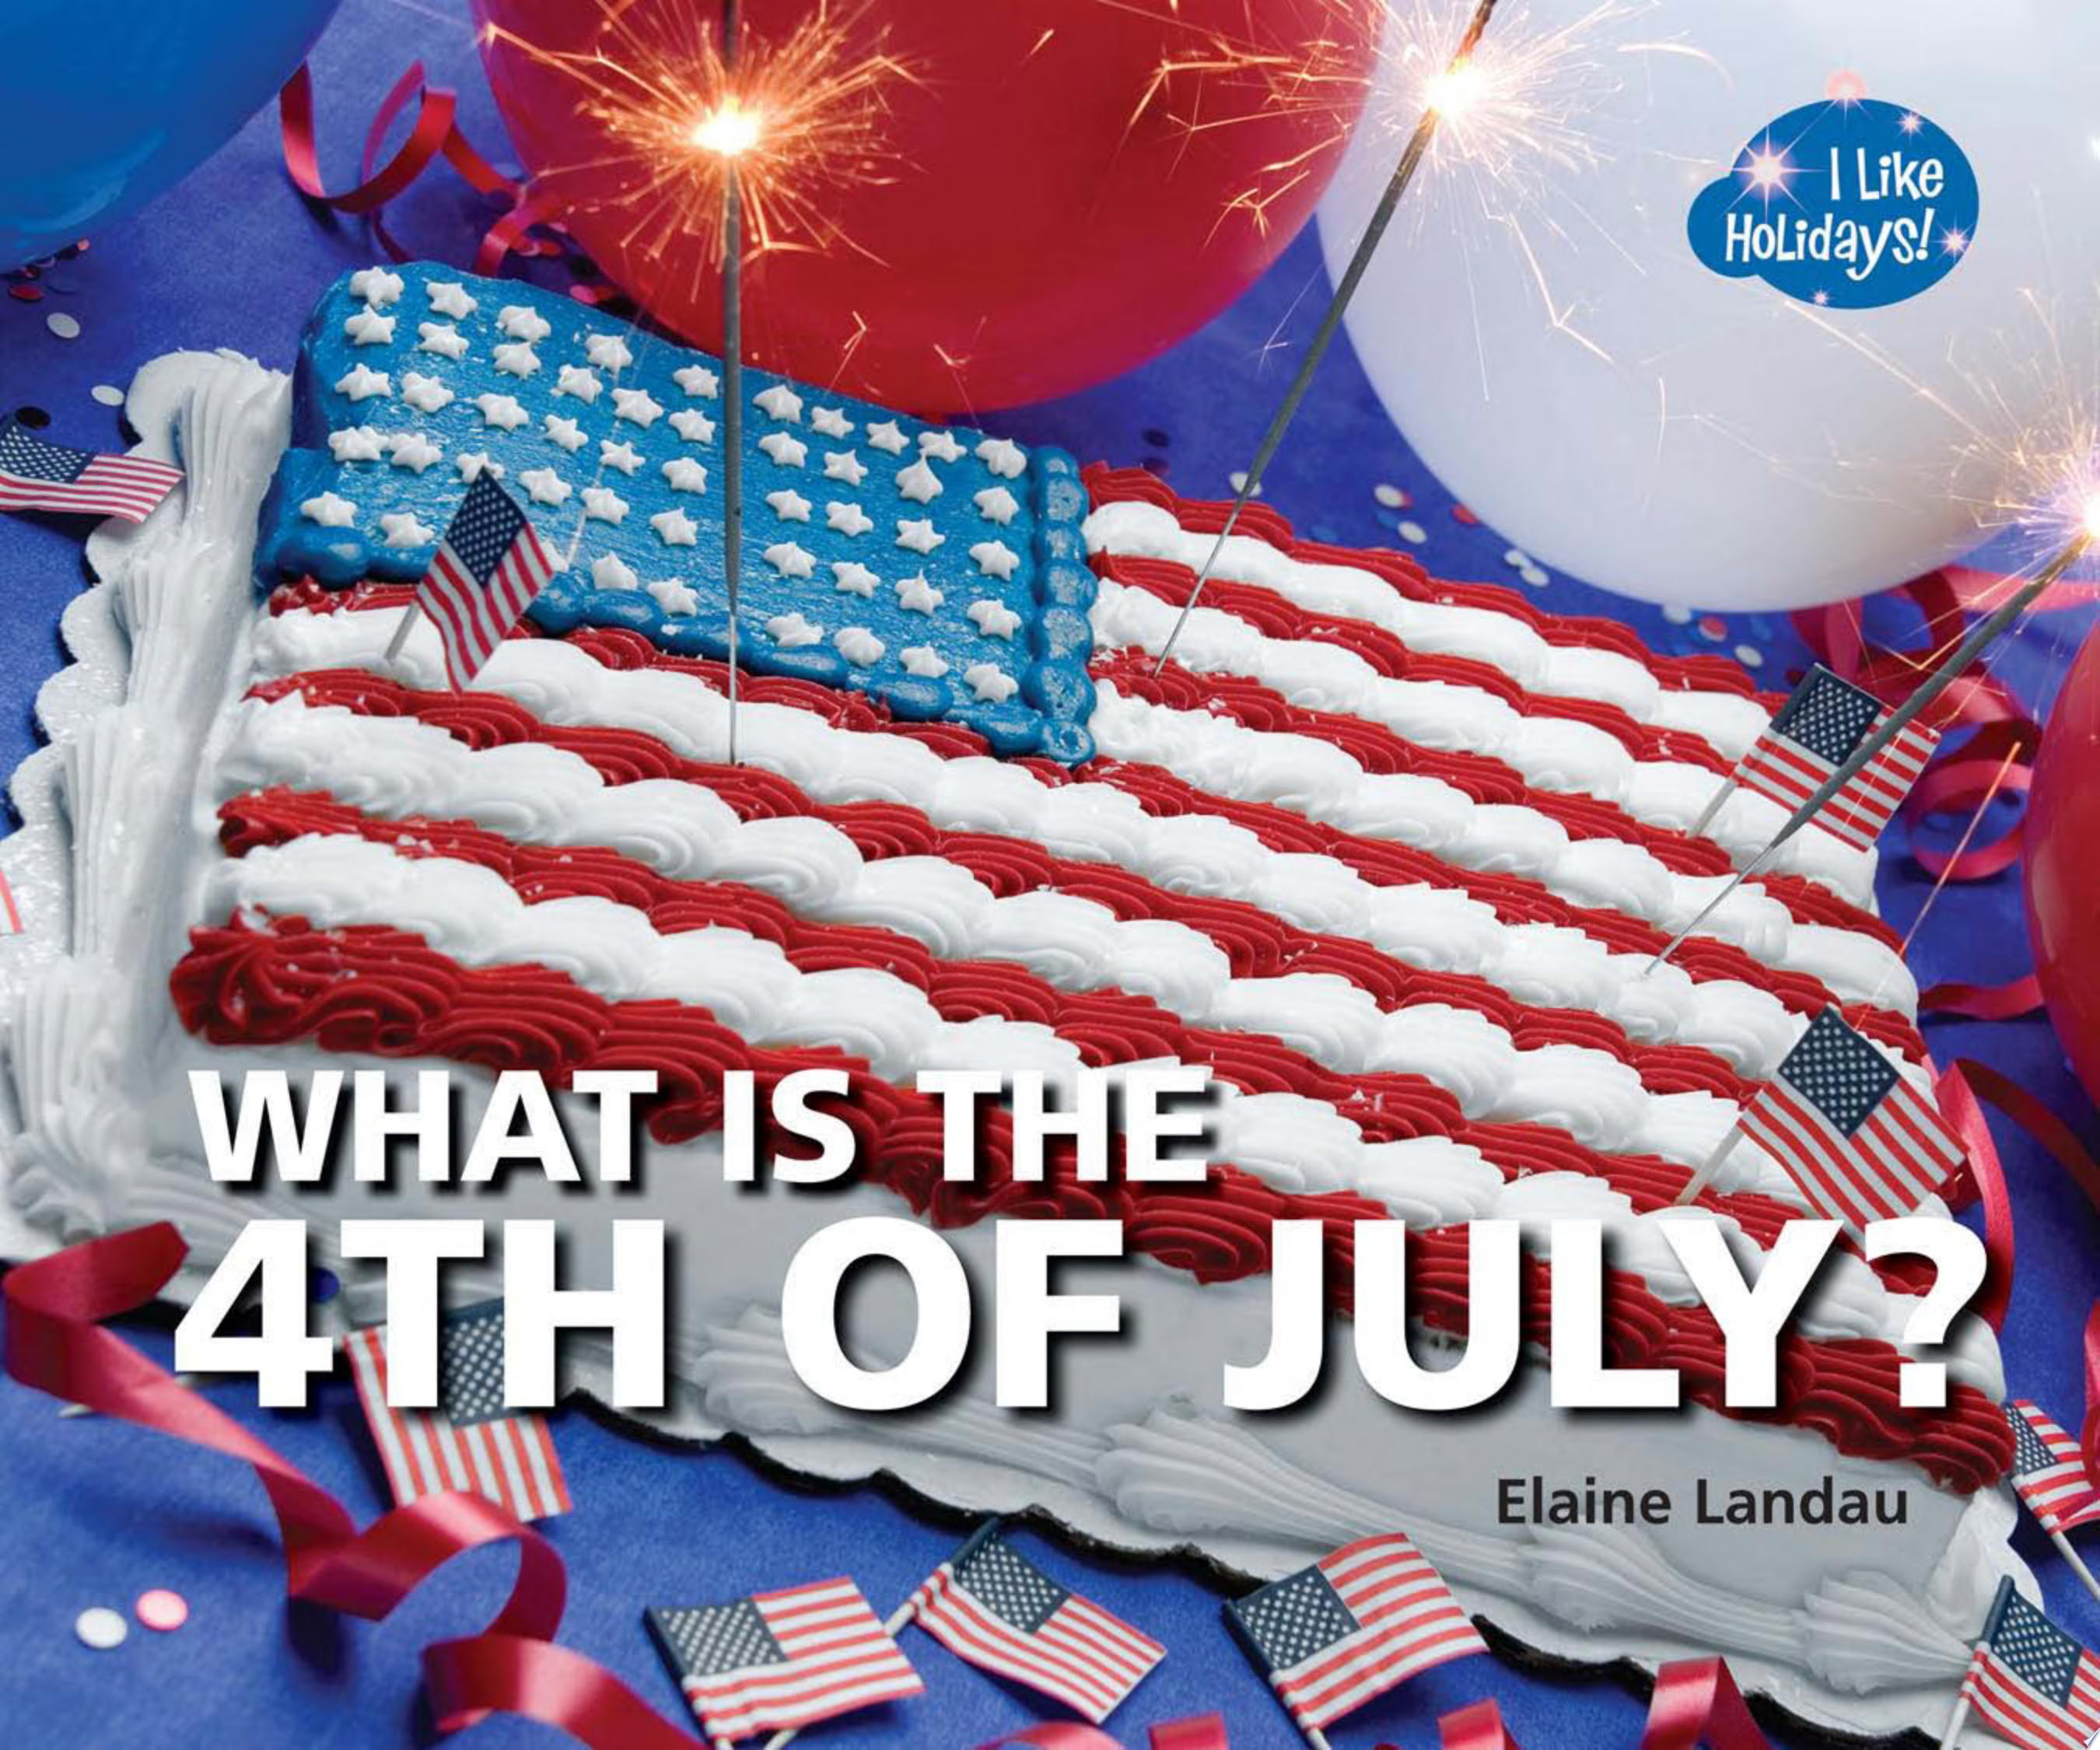 Image for "What Is the 4th of July?"